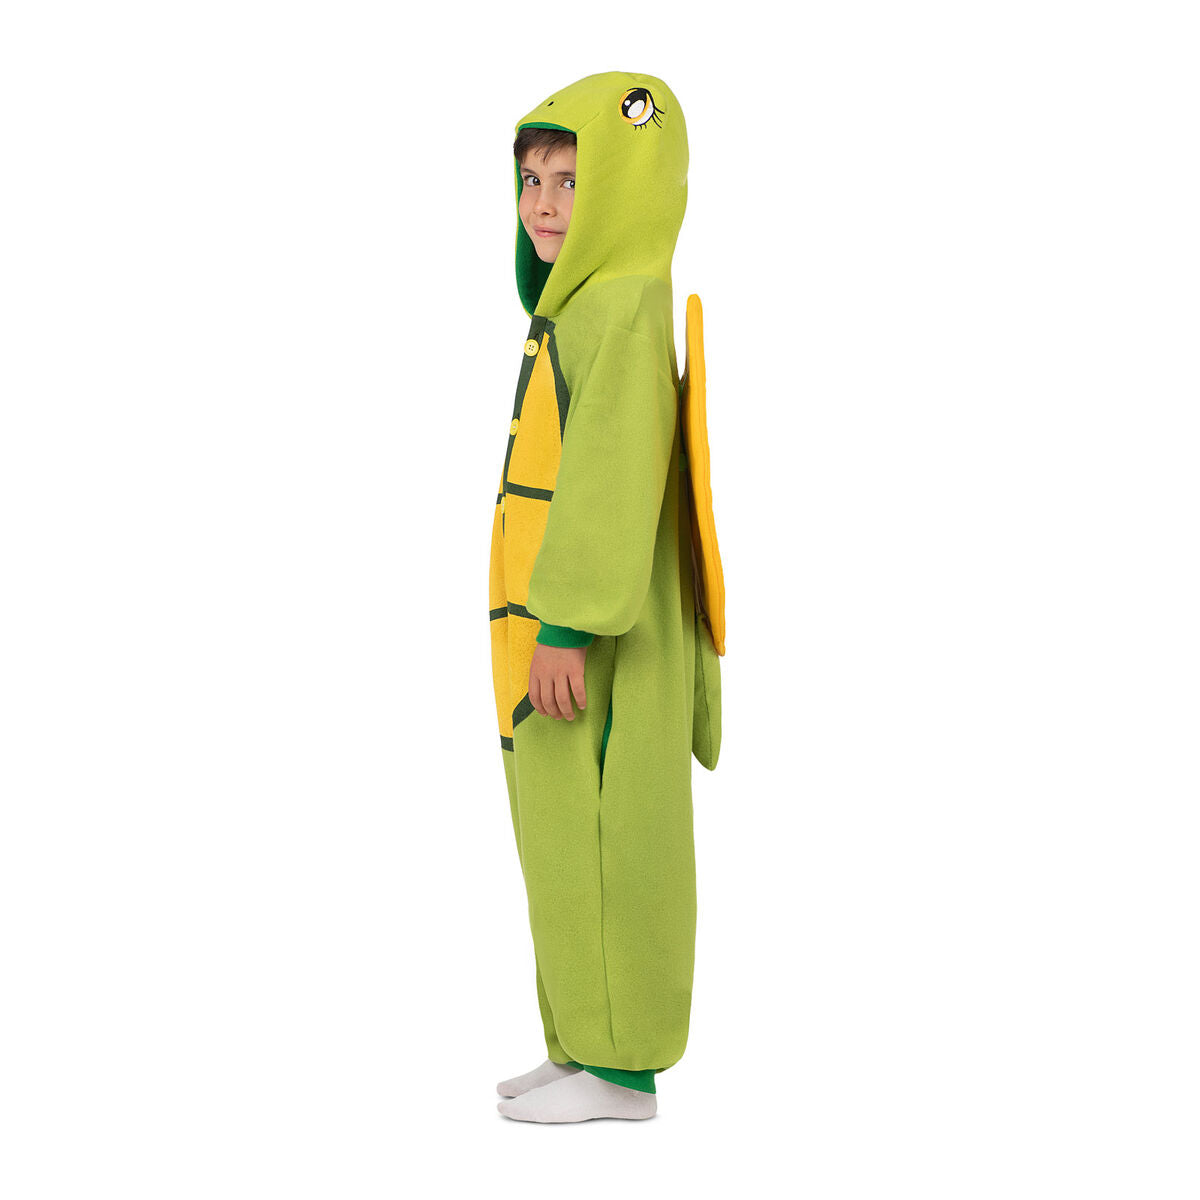 Costume for Children My Other Me Tortoise Yellow Green One size (2 Pieces)